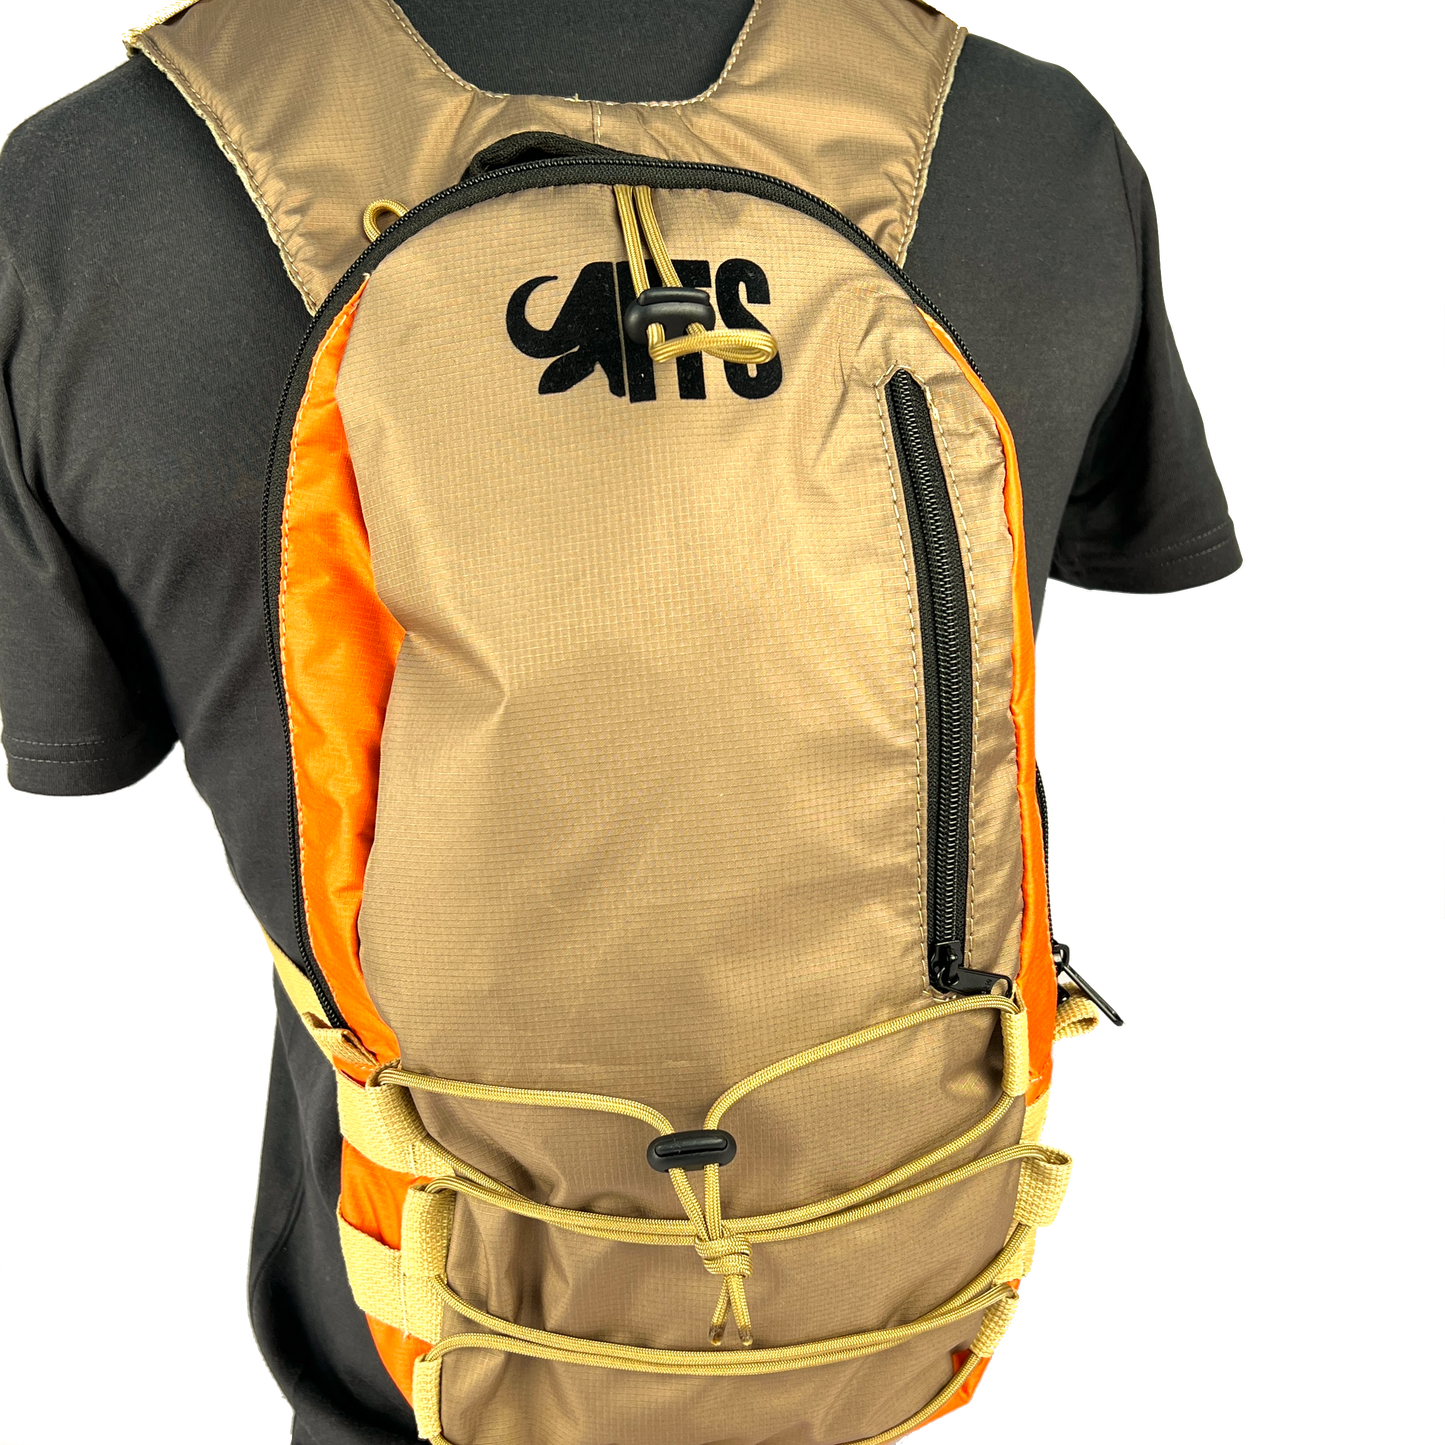 Tactical chest mount gear bag and fishing and hiking bag south Africa hydration pouch